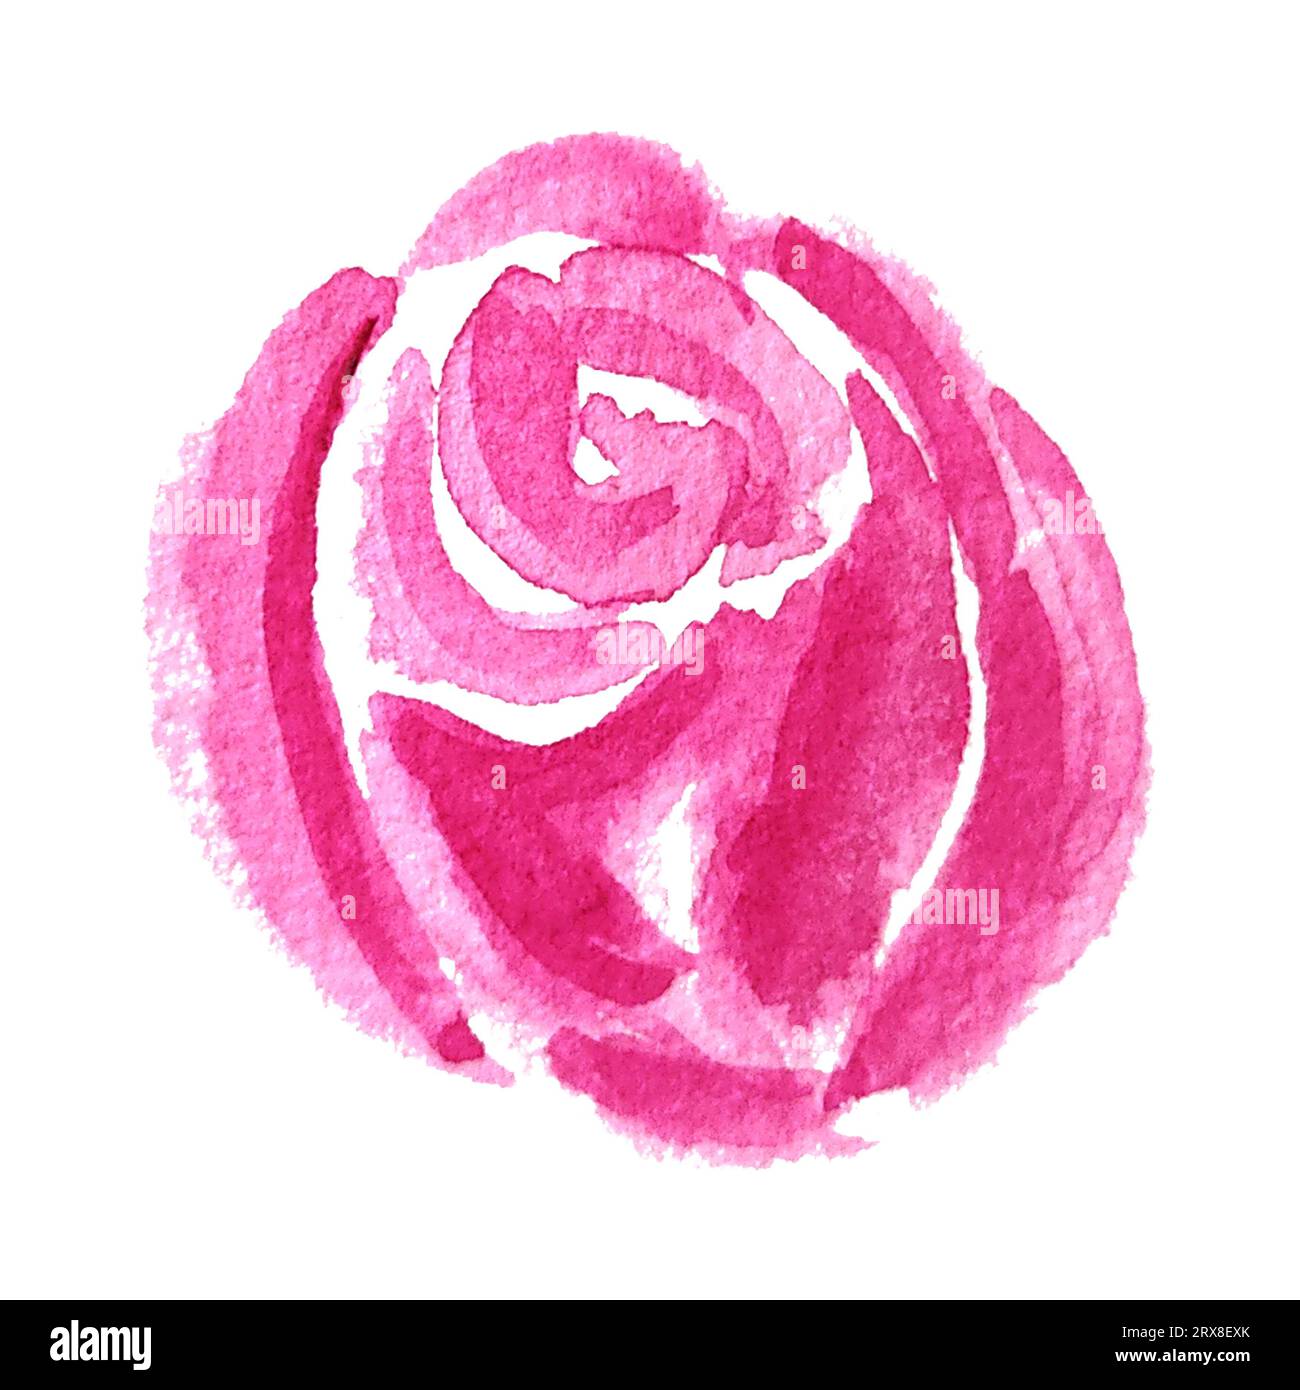 Watercolor rose flowers hand drawn in abstract style for use in logo, wedding, holiday and birthday designs. Pink daisy isolated elemet decoration Stock Photo